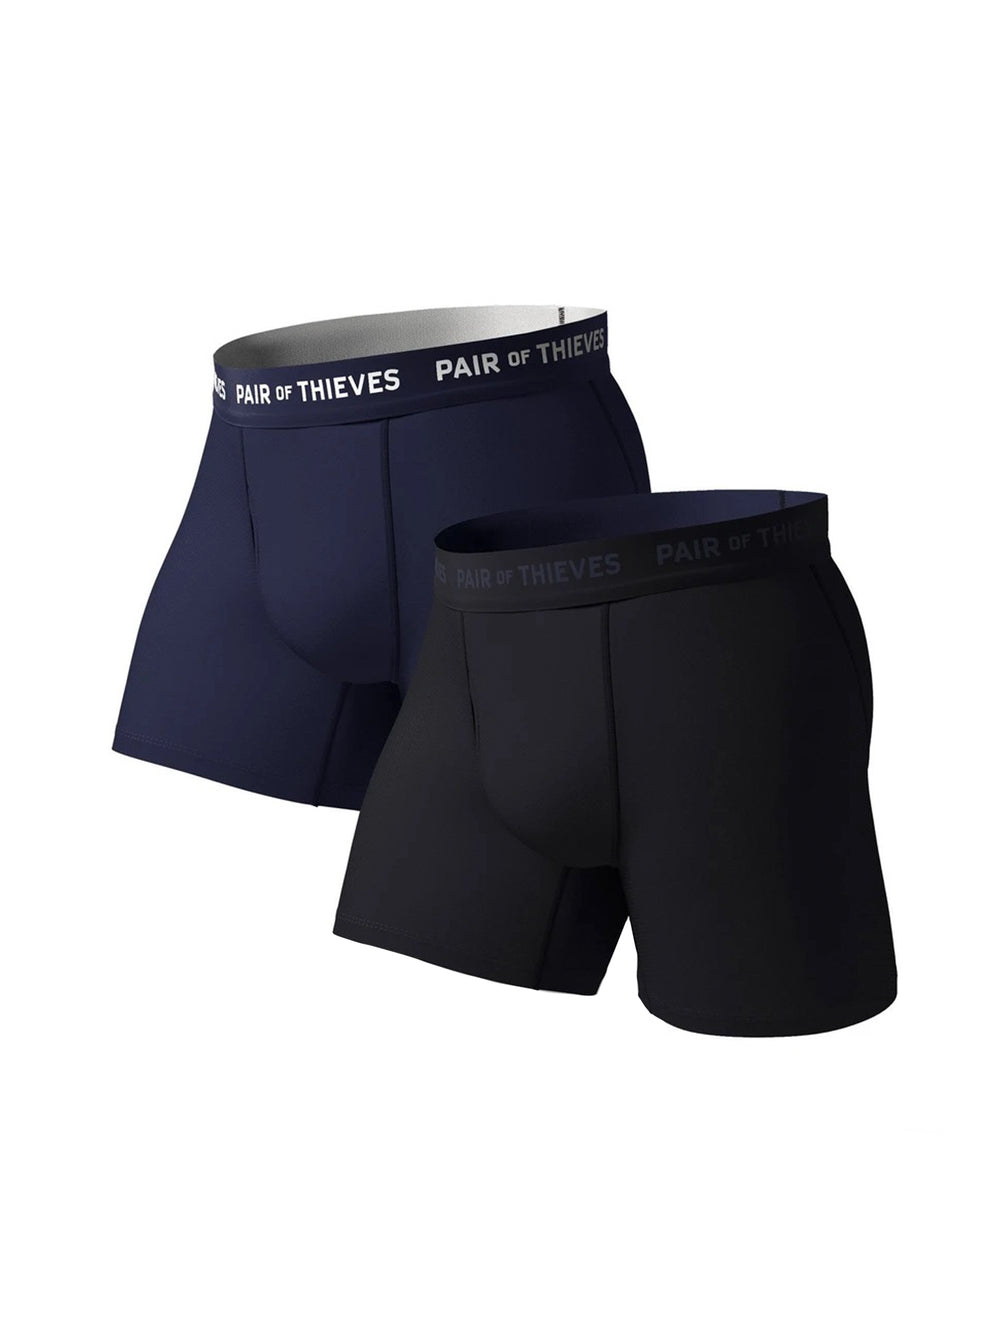 PAIR OF THIEVES RFE SUPER FIT BB - BLACK/NAVY - CLEARANCE